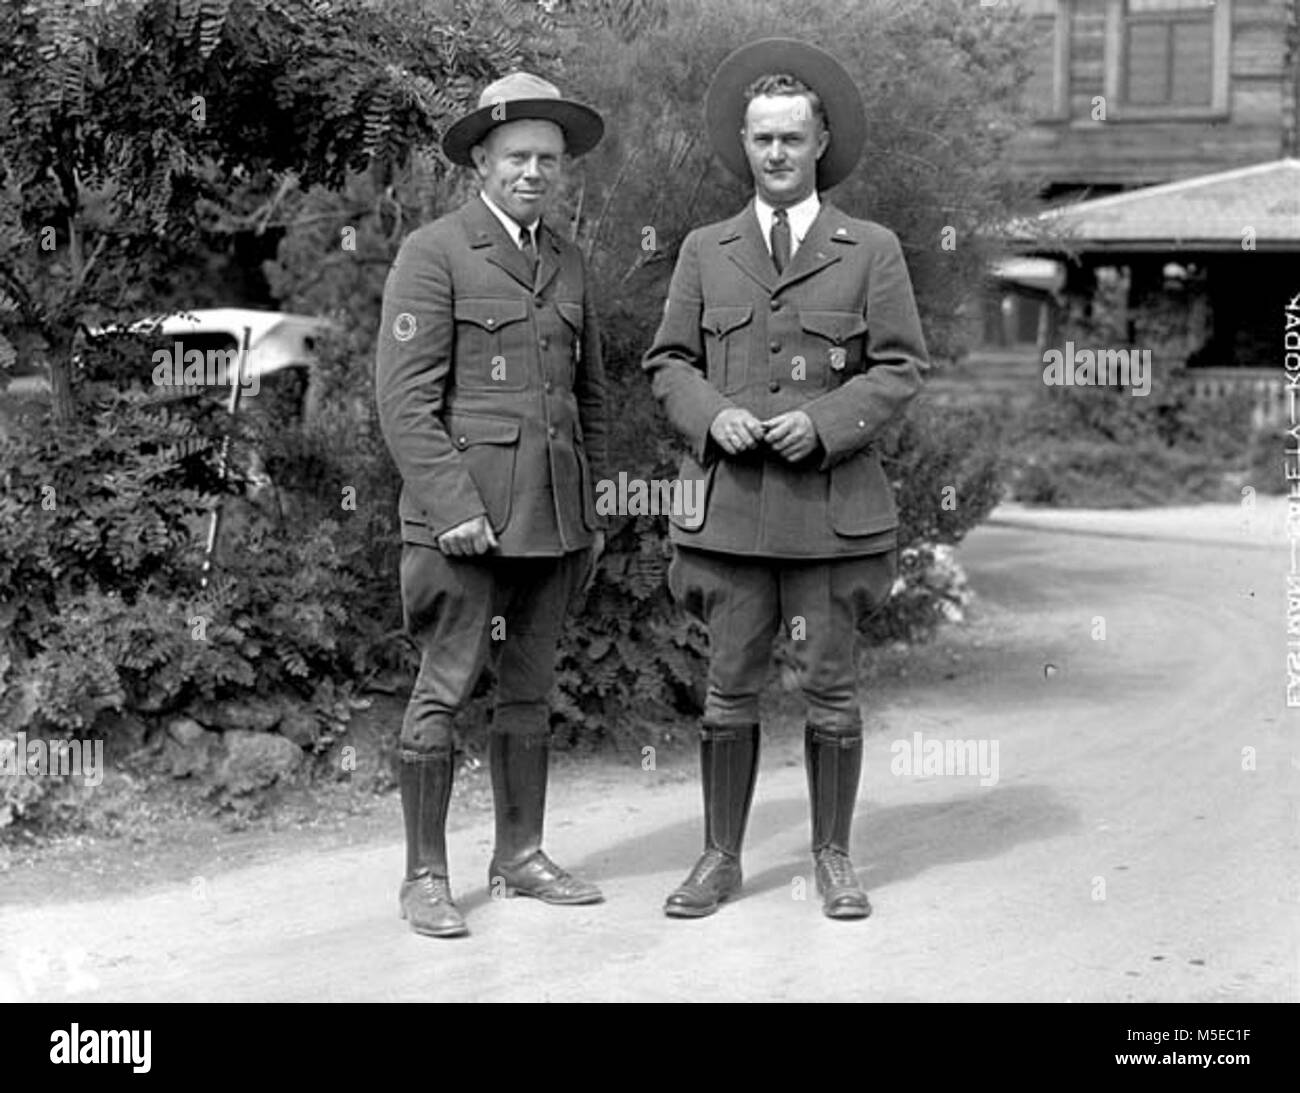 Grand Canyon Rangers Williamson and Cox   2  RANGERS, R.R. WILLIAMSON & CARL COX, STAND IN UNIFORM IN FRONT OF THE EL TOVAR HOTEL. JUNE 1931. Stock Photo